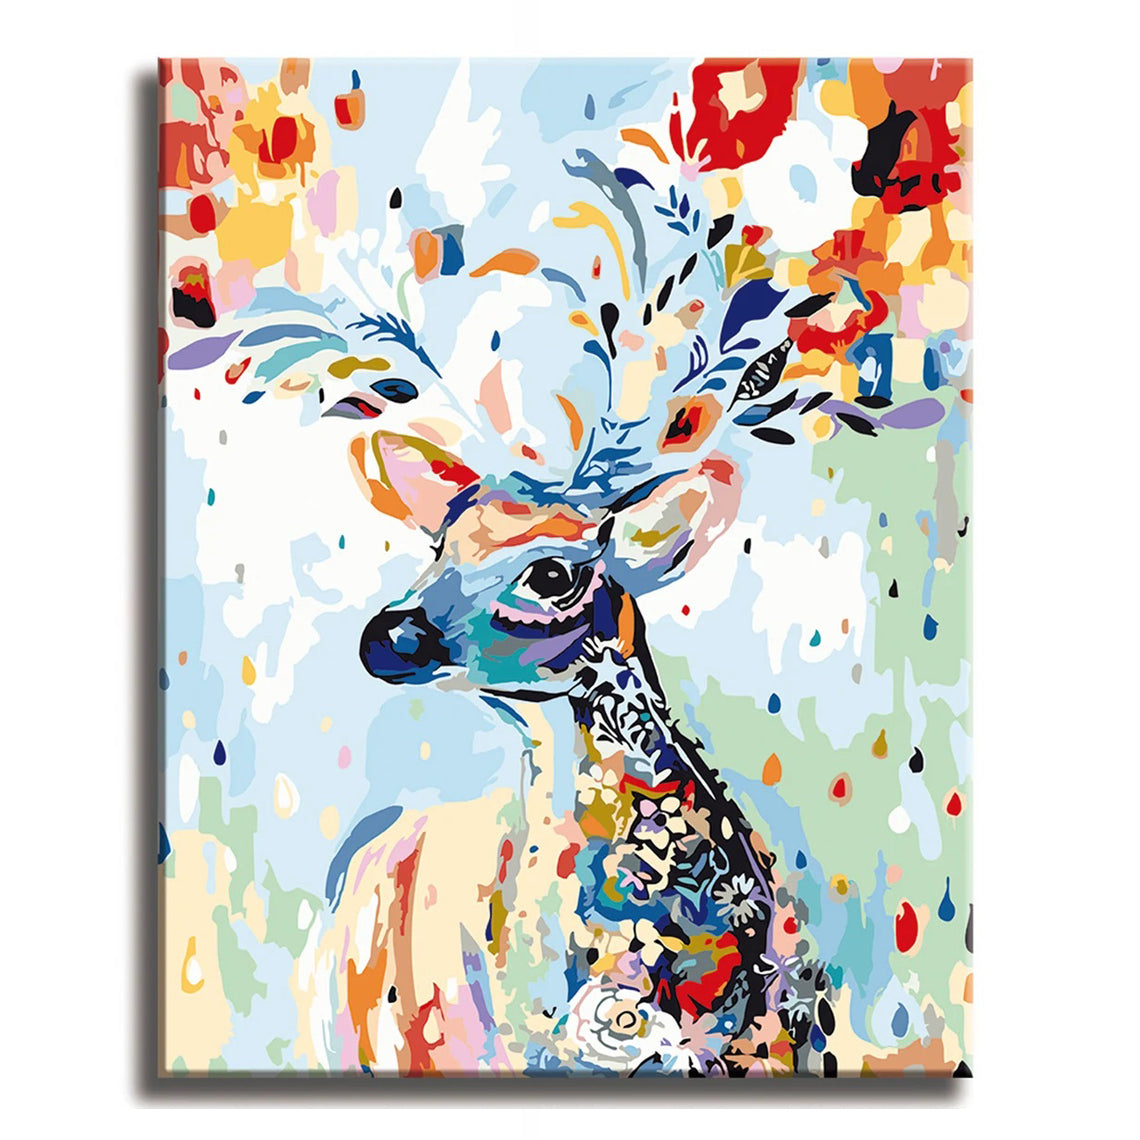 Colorful Deer - Paint by Numbers Kit for Adults DIY Oil Painting Kit on Canvas